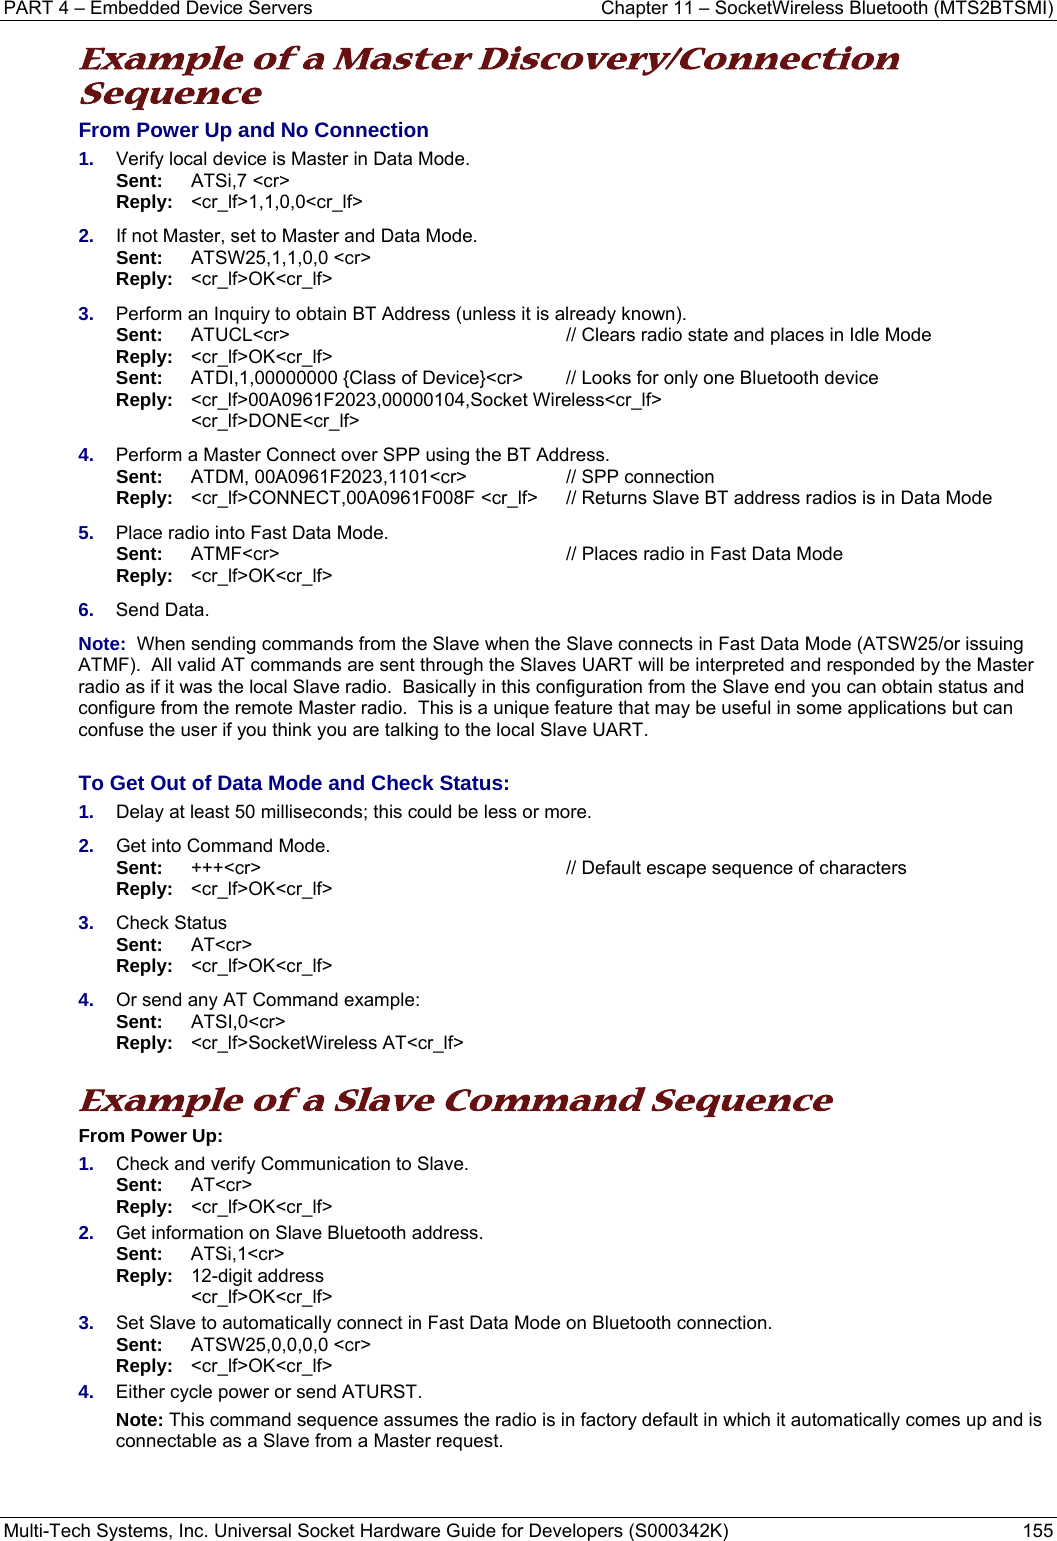 PART 4 – Embedded Device Servers  Chapter 11 – SocketWireless Bluetooth (MTS2BTSMI) Multi-Tech Systems, Inc. Universal Socket Hardware Guide for Developers (S000342K)  155  Example of a Master Discovery/Connection Sequence From Power Up and No Connection 1.  Verify local device is Master in Data Mode.  Sent:    ATSi,7 &lt;cr&gt;        Reply:  &lt;cr_lf&gt;1,1,0,0&lt;cr_lf&gt; 2.  If not Master, set to Master and Data Mode. Sent:    ATSW25,1,1,0,0 &lt;cr&gt;       Reply:   &lt;cr_lf&gt;OK&lt;cr_lf&gt; 3.  Perform an Inquiry to obtain BT Address (unless it is already known).  Sent:  ATUCL&lt;cr&gt; // Clears radio state and places in Idle Mode Reply:  &lt;cr_lf&gt;OK&lt;cr_lf&gt;  Sent:   ATDI,1,00000000 {Class of Device}&lt;cr&gt;   // Looks for only one Bluetooth device Reply: &lt;cr_lf&gt;00A0961F2023,00000104,Socket Wireless&lt;cr_lf&gt;  &lt;cr_lf&gt;DONE&lt;cr_lf&gt; 4.  Perform a Master Connect over SPP using the BT Address.  Sent:  ATDM, 00A0961F2023,1101&lt;cr&gt;  // SPP connection    Reply: &lt;cr_lf&gt;CONNECT,00A0961F008F &lt;cr_lf&gt;  // Returns Slave BT address radios is in Data Mode 5.  Place radio into Fast Data Mode.  Sent:  ATMF&lt;cr&gt;  // Places radio in Fast Data Mode  Reply: &lt;cr_lf&gt;OK&lt;cr_lf&gt; 6.  Send Data.  Note:  When sending commands from the Slave when the Slave connects in Fast Data Mode (ATSW25/or issuing ATMF).  All valid AT commands are sent through the Slaves UART will be interpreted and responded by the Master radio as if it was the local Slave radio.  Basically in this configuration from the Slave end you can obtain status and configure from the remote Master radio.  This is a unique feature that may be useful in some applications but can confuse the user if you think you are talking to the local Slave UART.     To Get Out of Data Mode and Check Status: 1.  Delay at least 50 milliseconds; this could be less or more. 2.  Get into Command Mode.  Sent:  +++&lt;cr&gt;  // Default escape sequence of characters  Reply: &lt;cr_lf&gt;OK&lt;cr_lf&gt; 3.  Check Status  Sent:  AT&lt;cr&gt;  Reply: &lt;cr_lf&gt;OK&lt;cr_lf&gt; 4.  Or send any AT Command example:  Sent:  ATSI,0&lt;cr&gt;  Reply: &lt;cr_lf&gt;SocketWireless AT&lt;cr_lf&gt;   Example of a Slave Command Sequence From Power Up: 1.  Check and verify Communication to Slave. Sent:   AT&lt;cr&gt; Reply:   &lt;cr_lf&gt;OK&lt;cr_lf&gt; 2.  Get information on Slave Bluetooth address. Sent:   ATSi,1&lt;cr&gt; Reply:  12-digit address   &lt;cr_lf&gt;OK&lt;cr_lf&gt; 3.  Set Slave to automatically connect in Fast Data Mode on Bluetooth connection. Sent:   ATSW25,0,0,0,0 &lt;cr&gt;       Reply:   &lt;cr_lf&gt;OK&lt;cr_lf&gt; 4.  Either cycle power or send ATURST. Note: This command sequence assumes the radio is in factory default in which it automatically comes up and is connectable as a Slave from a Master request.     